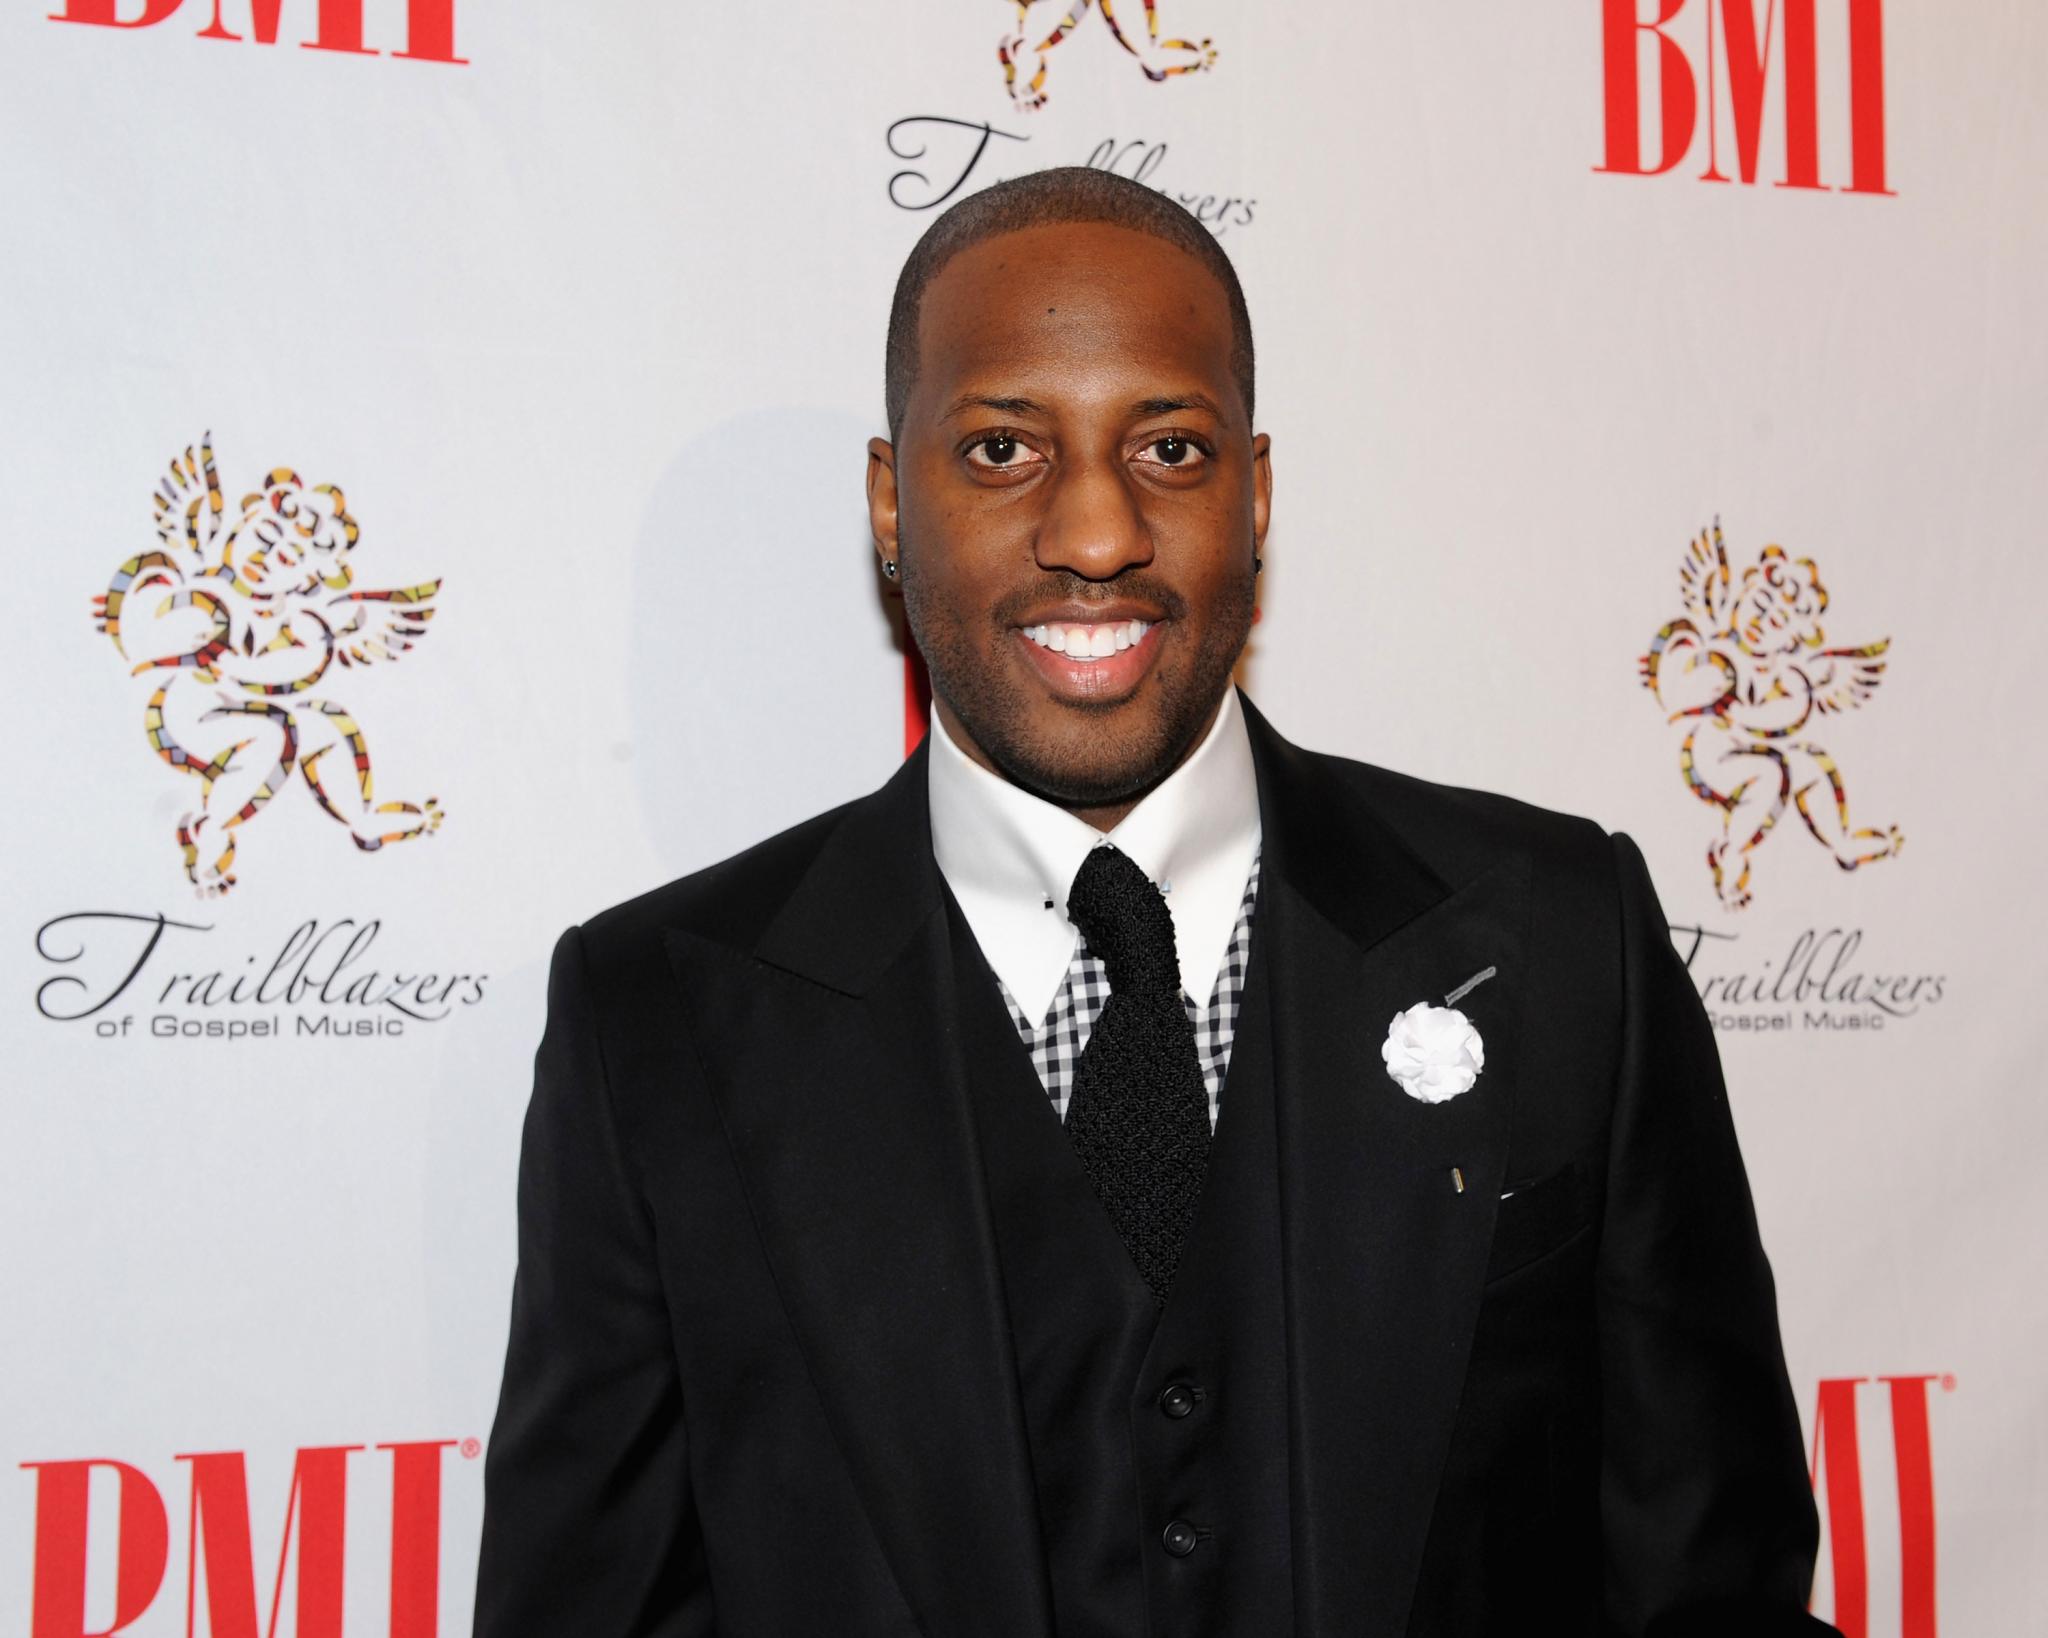 Isaac Carree on New Album, the New Guard of Gospel, and Being Mentored by Donnie McClurkin